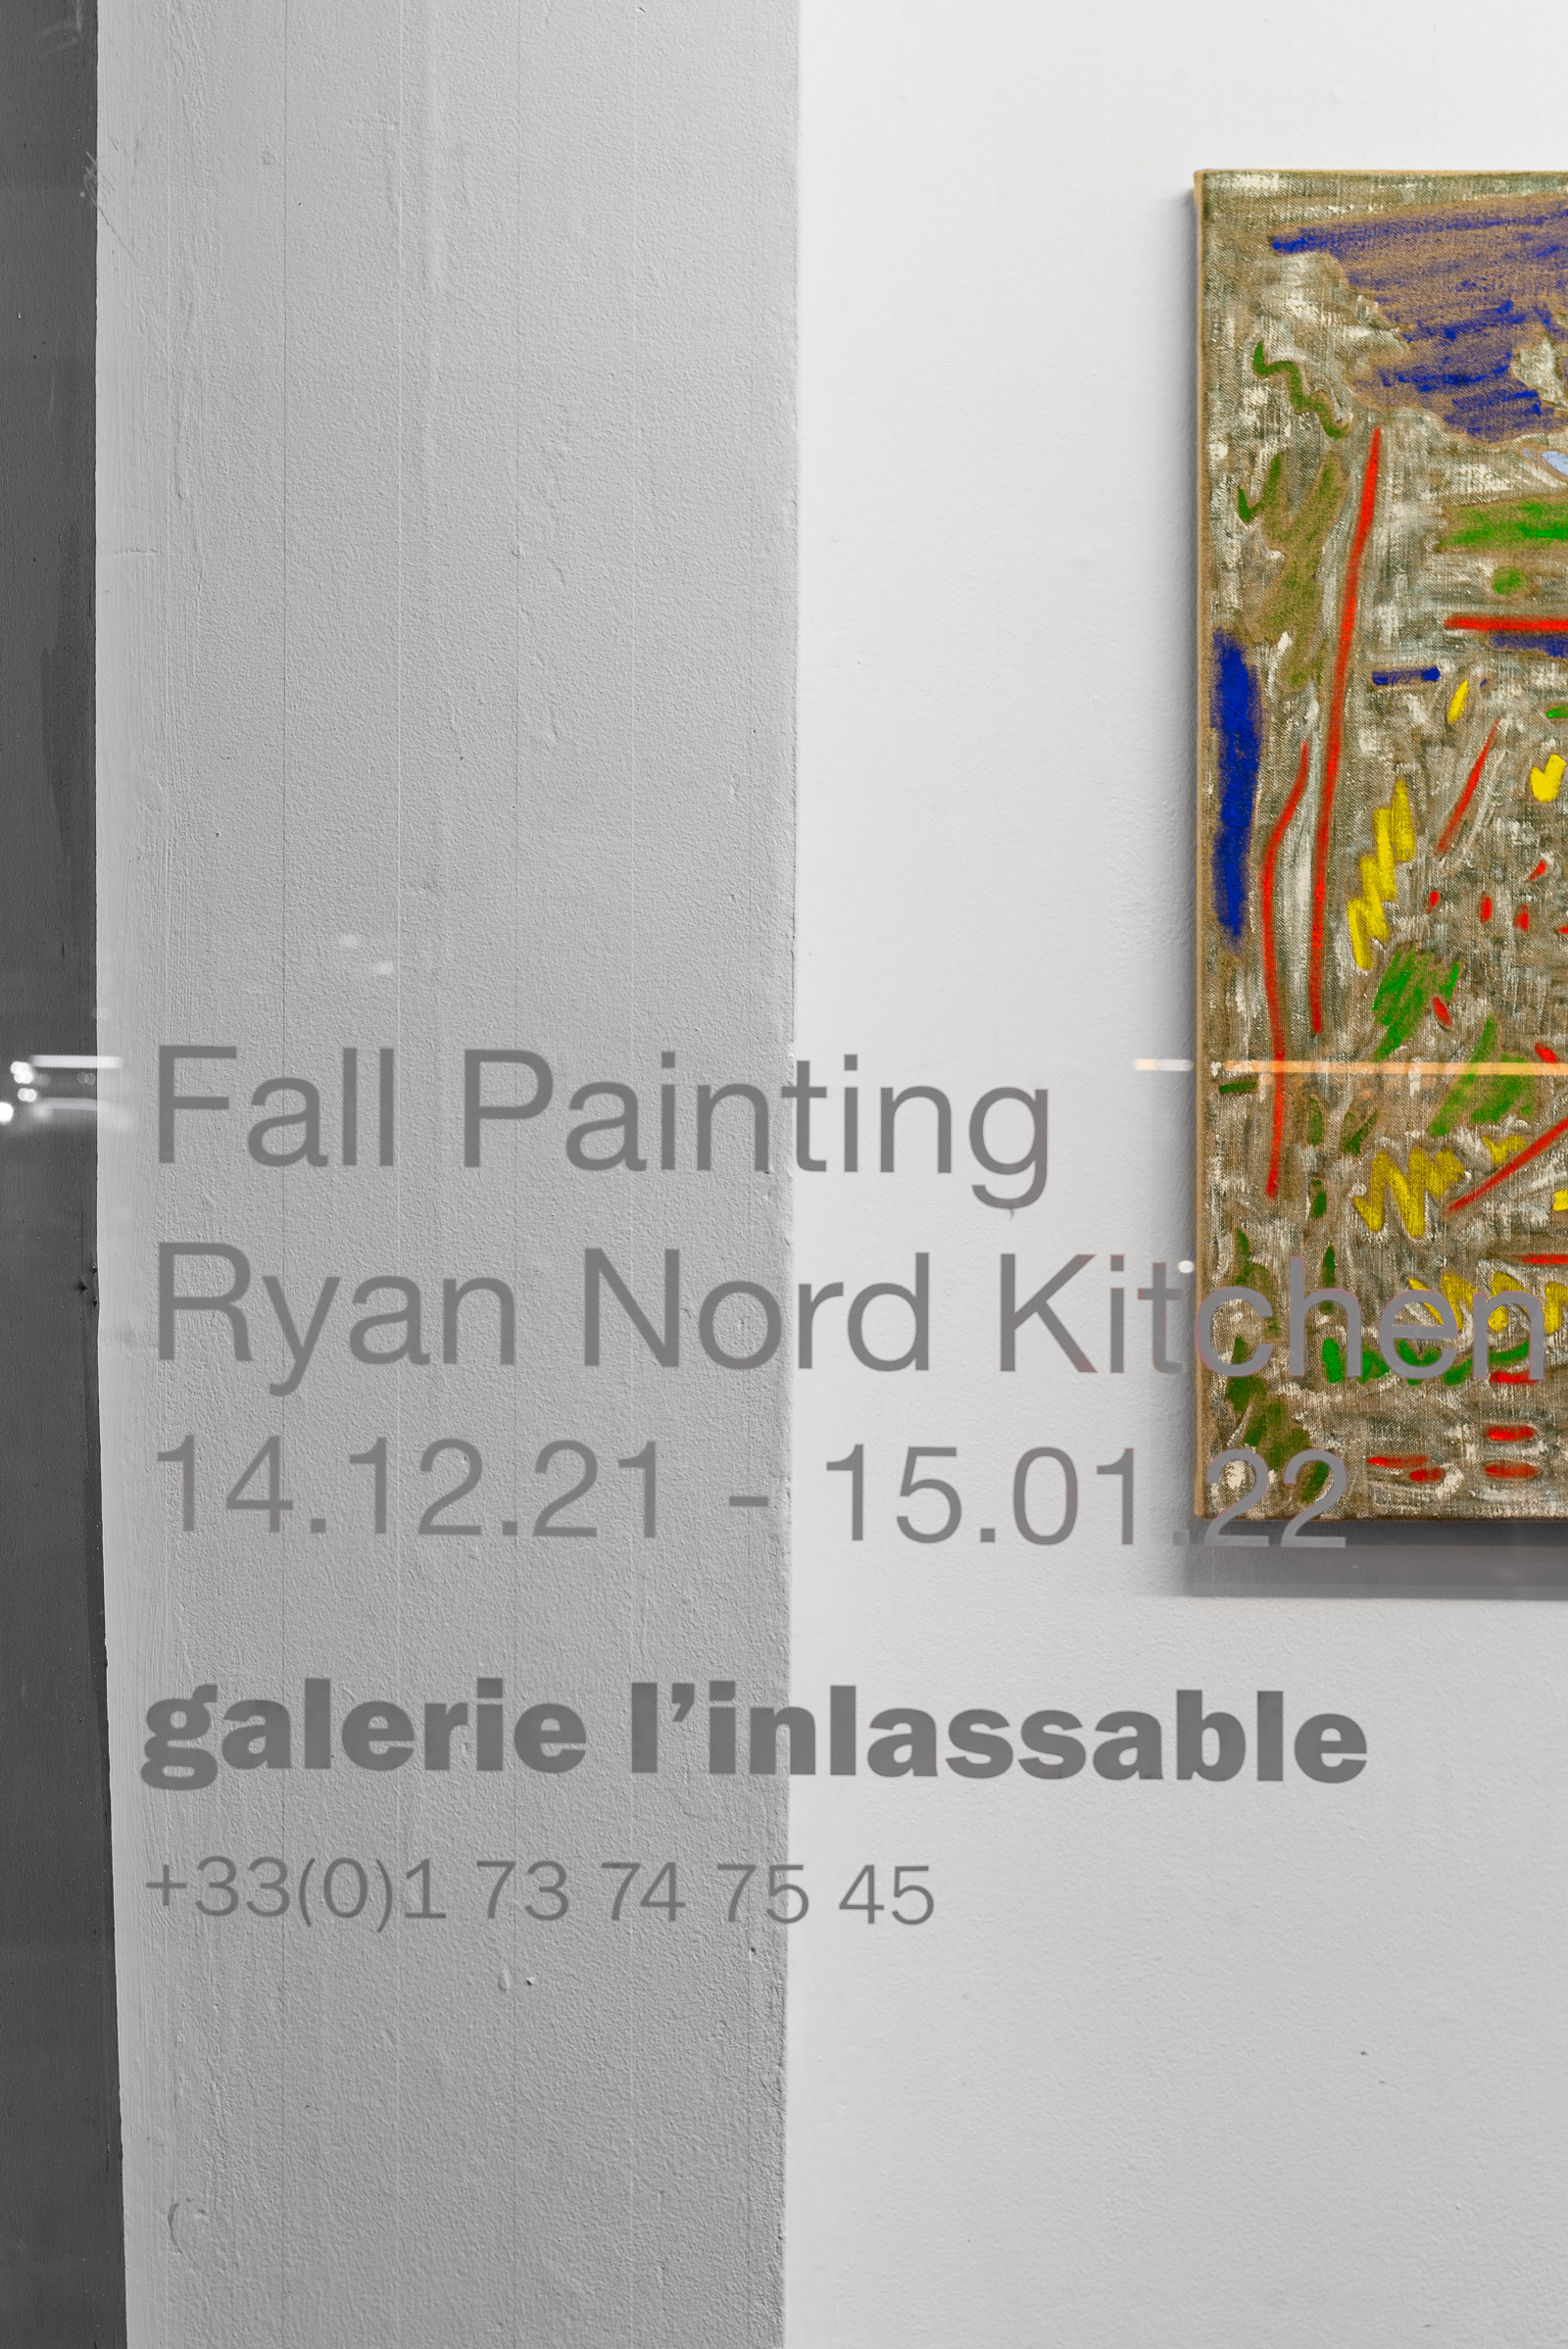 Installation window view from Ryan Nord Kitchen's solo exhibition, Fall Paintings, at Galerie l'inlassable. 